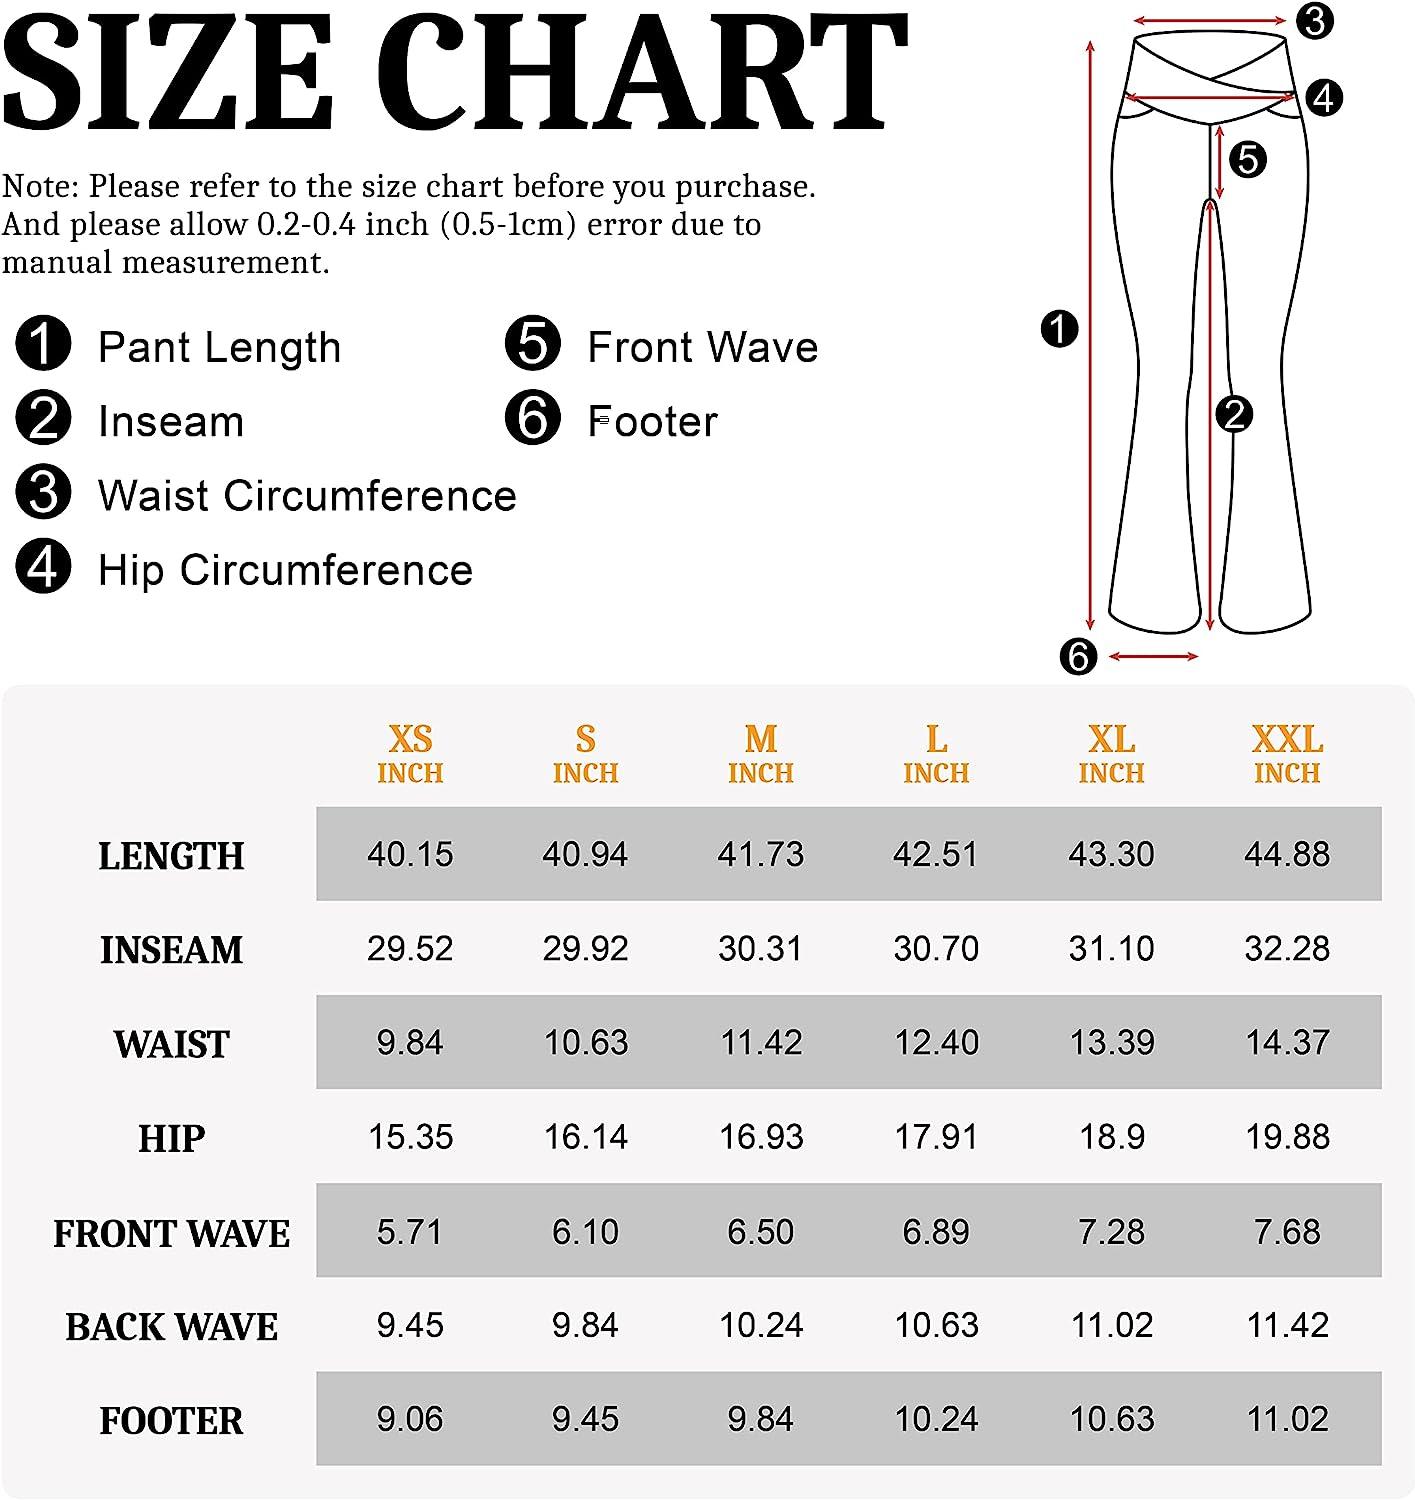 HEGALY Women's Flare Yoga Pants - Crossover Flare Leggings Buttery Soft  High Waisted Workout Casual Bootcut Pants, Dark Grey, L price in Saudi  Arabia,  Saudi Arabia